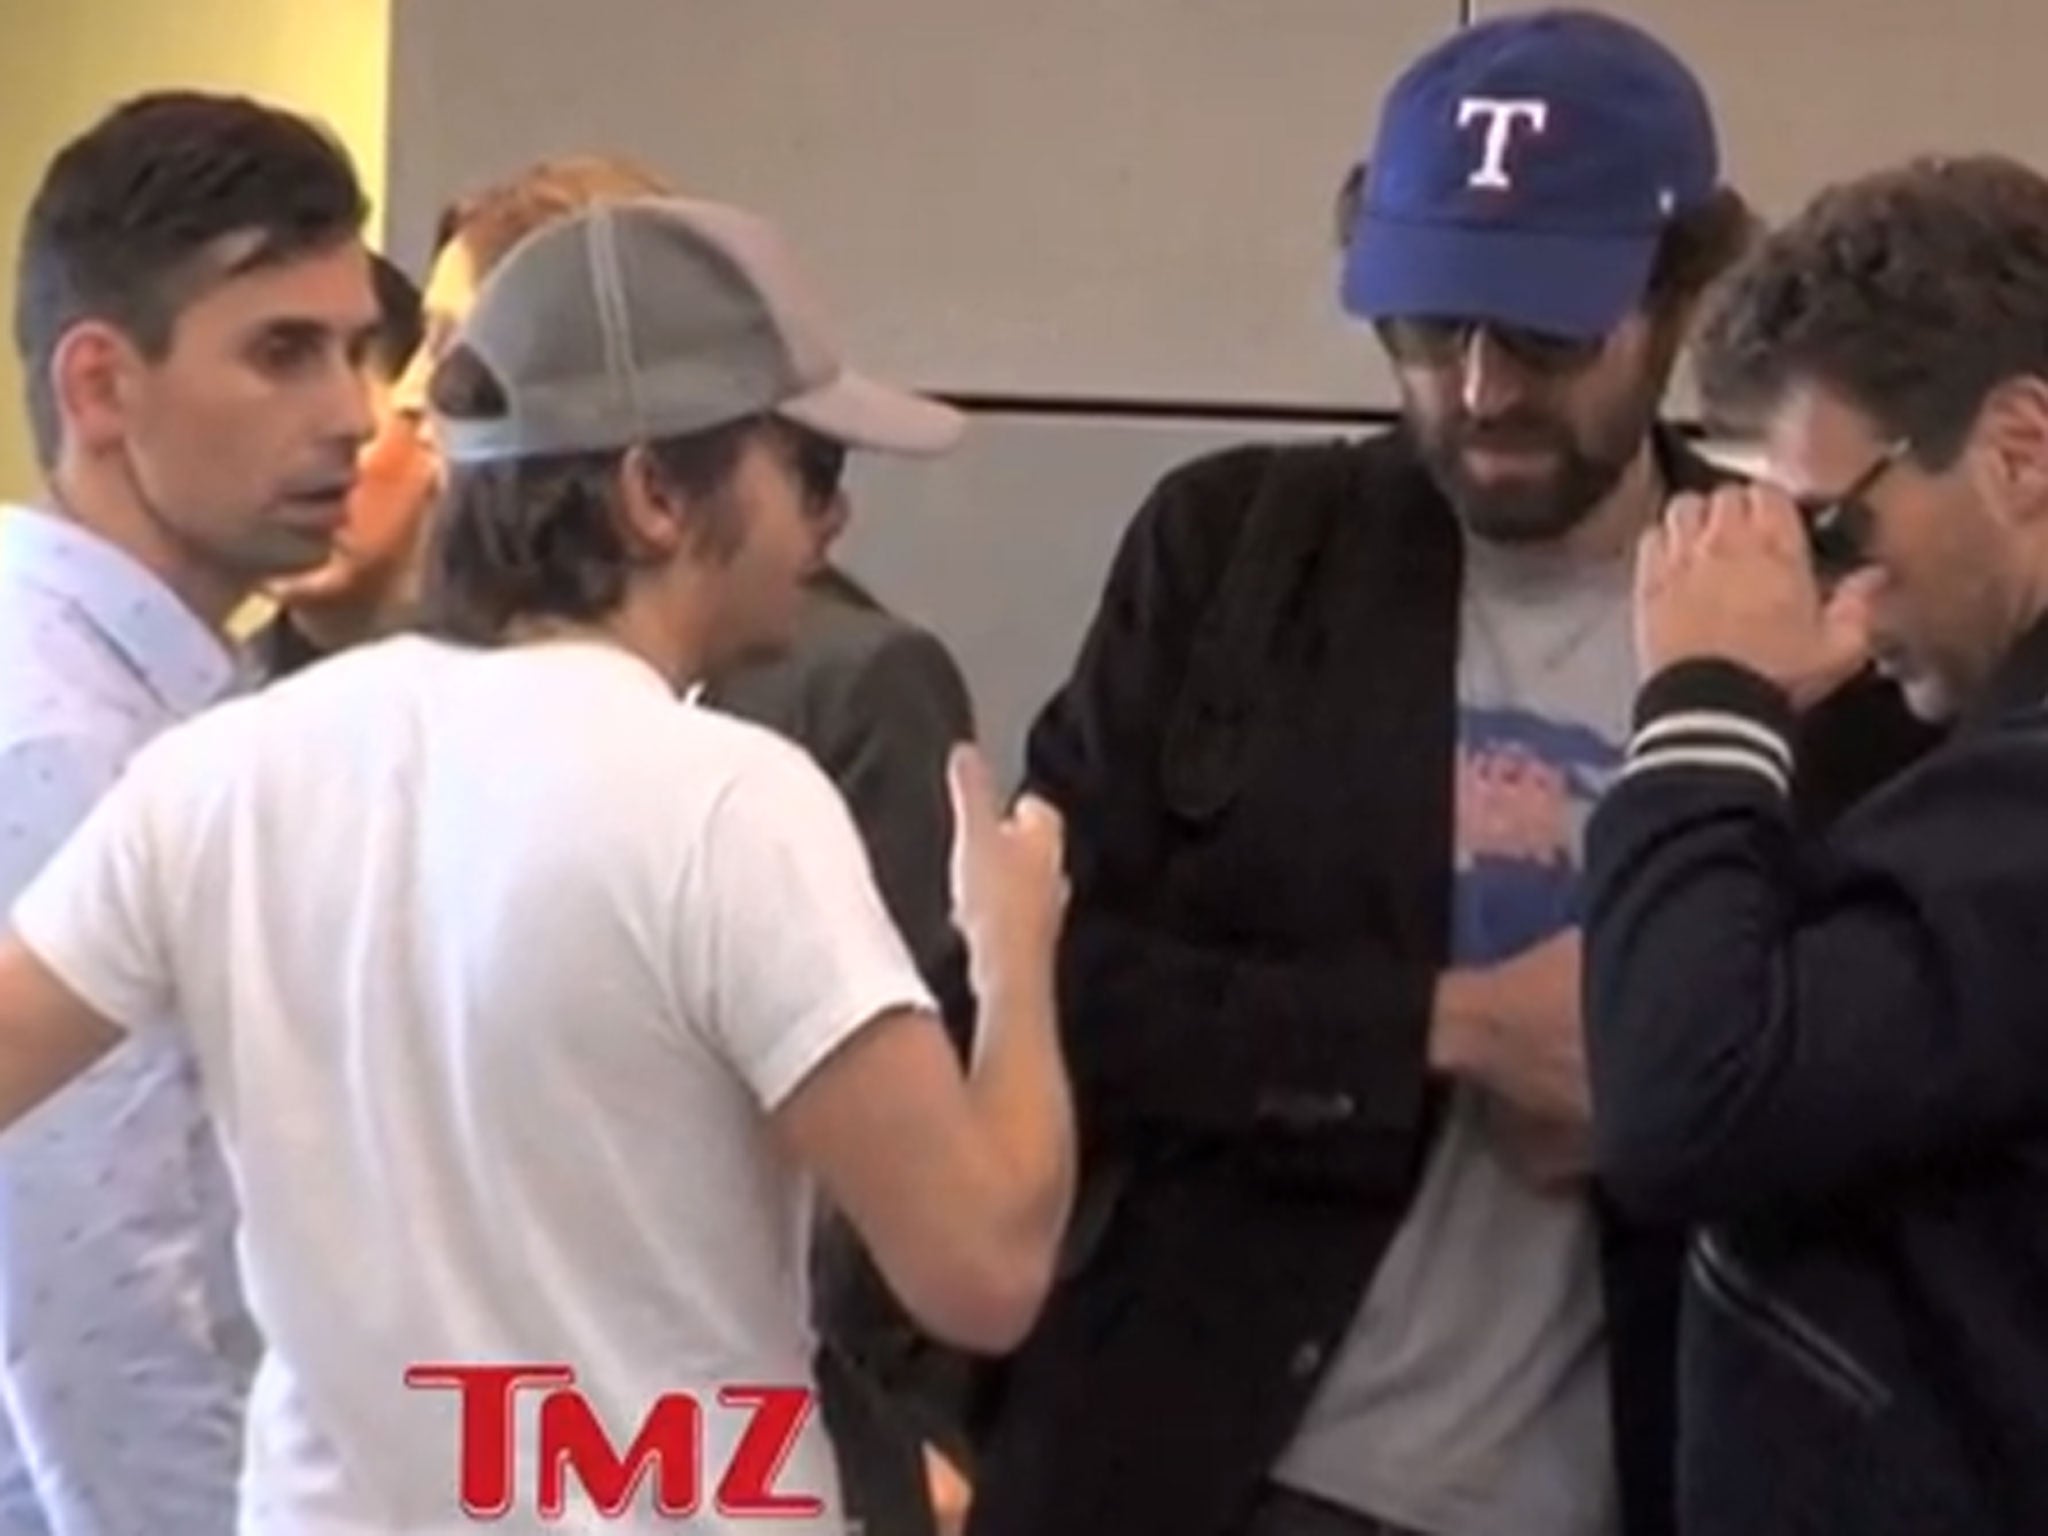 Daft Punk Unmasked Grammy Winners Spotted Without Robotic Helmets At Lax Airport The Independent The Independent